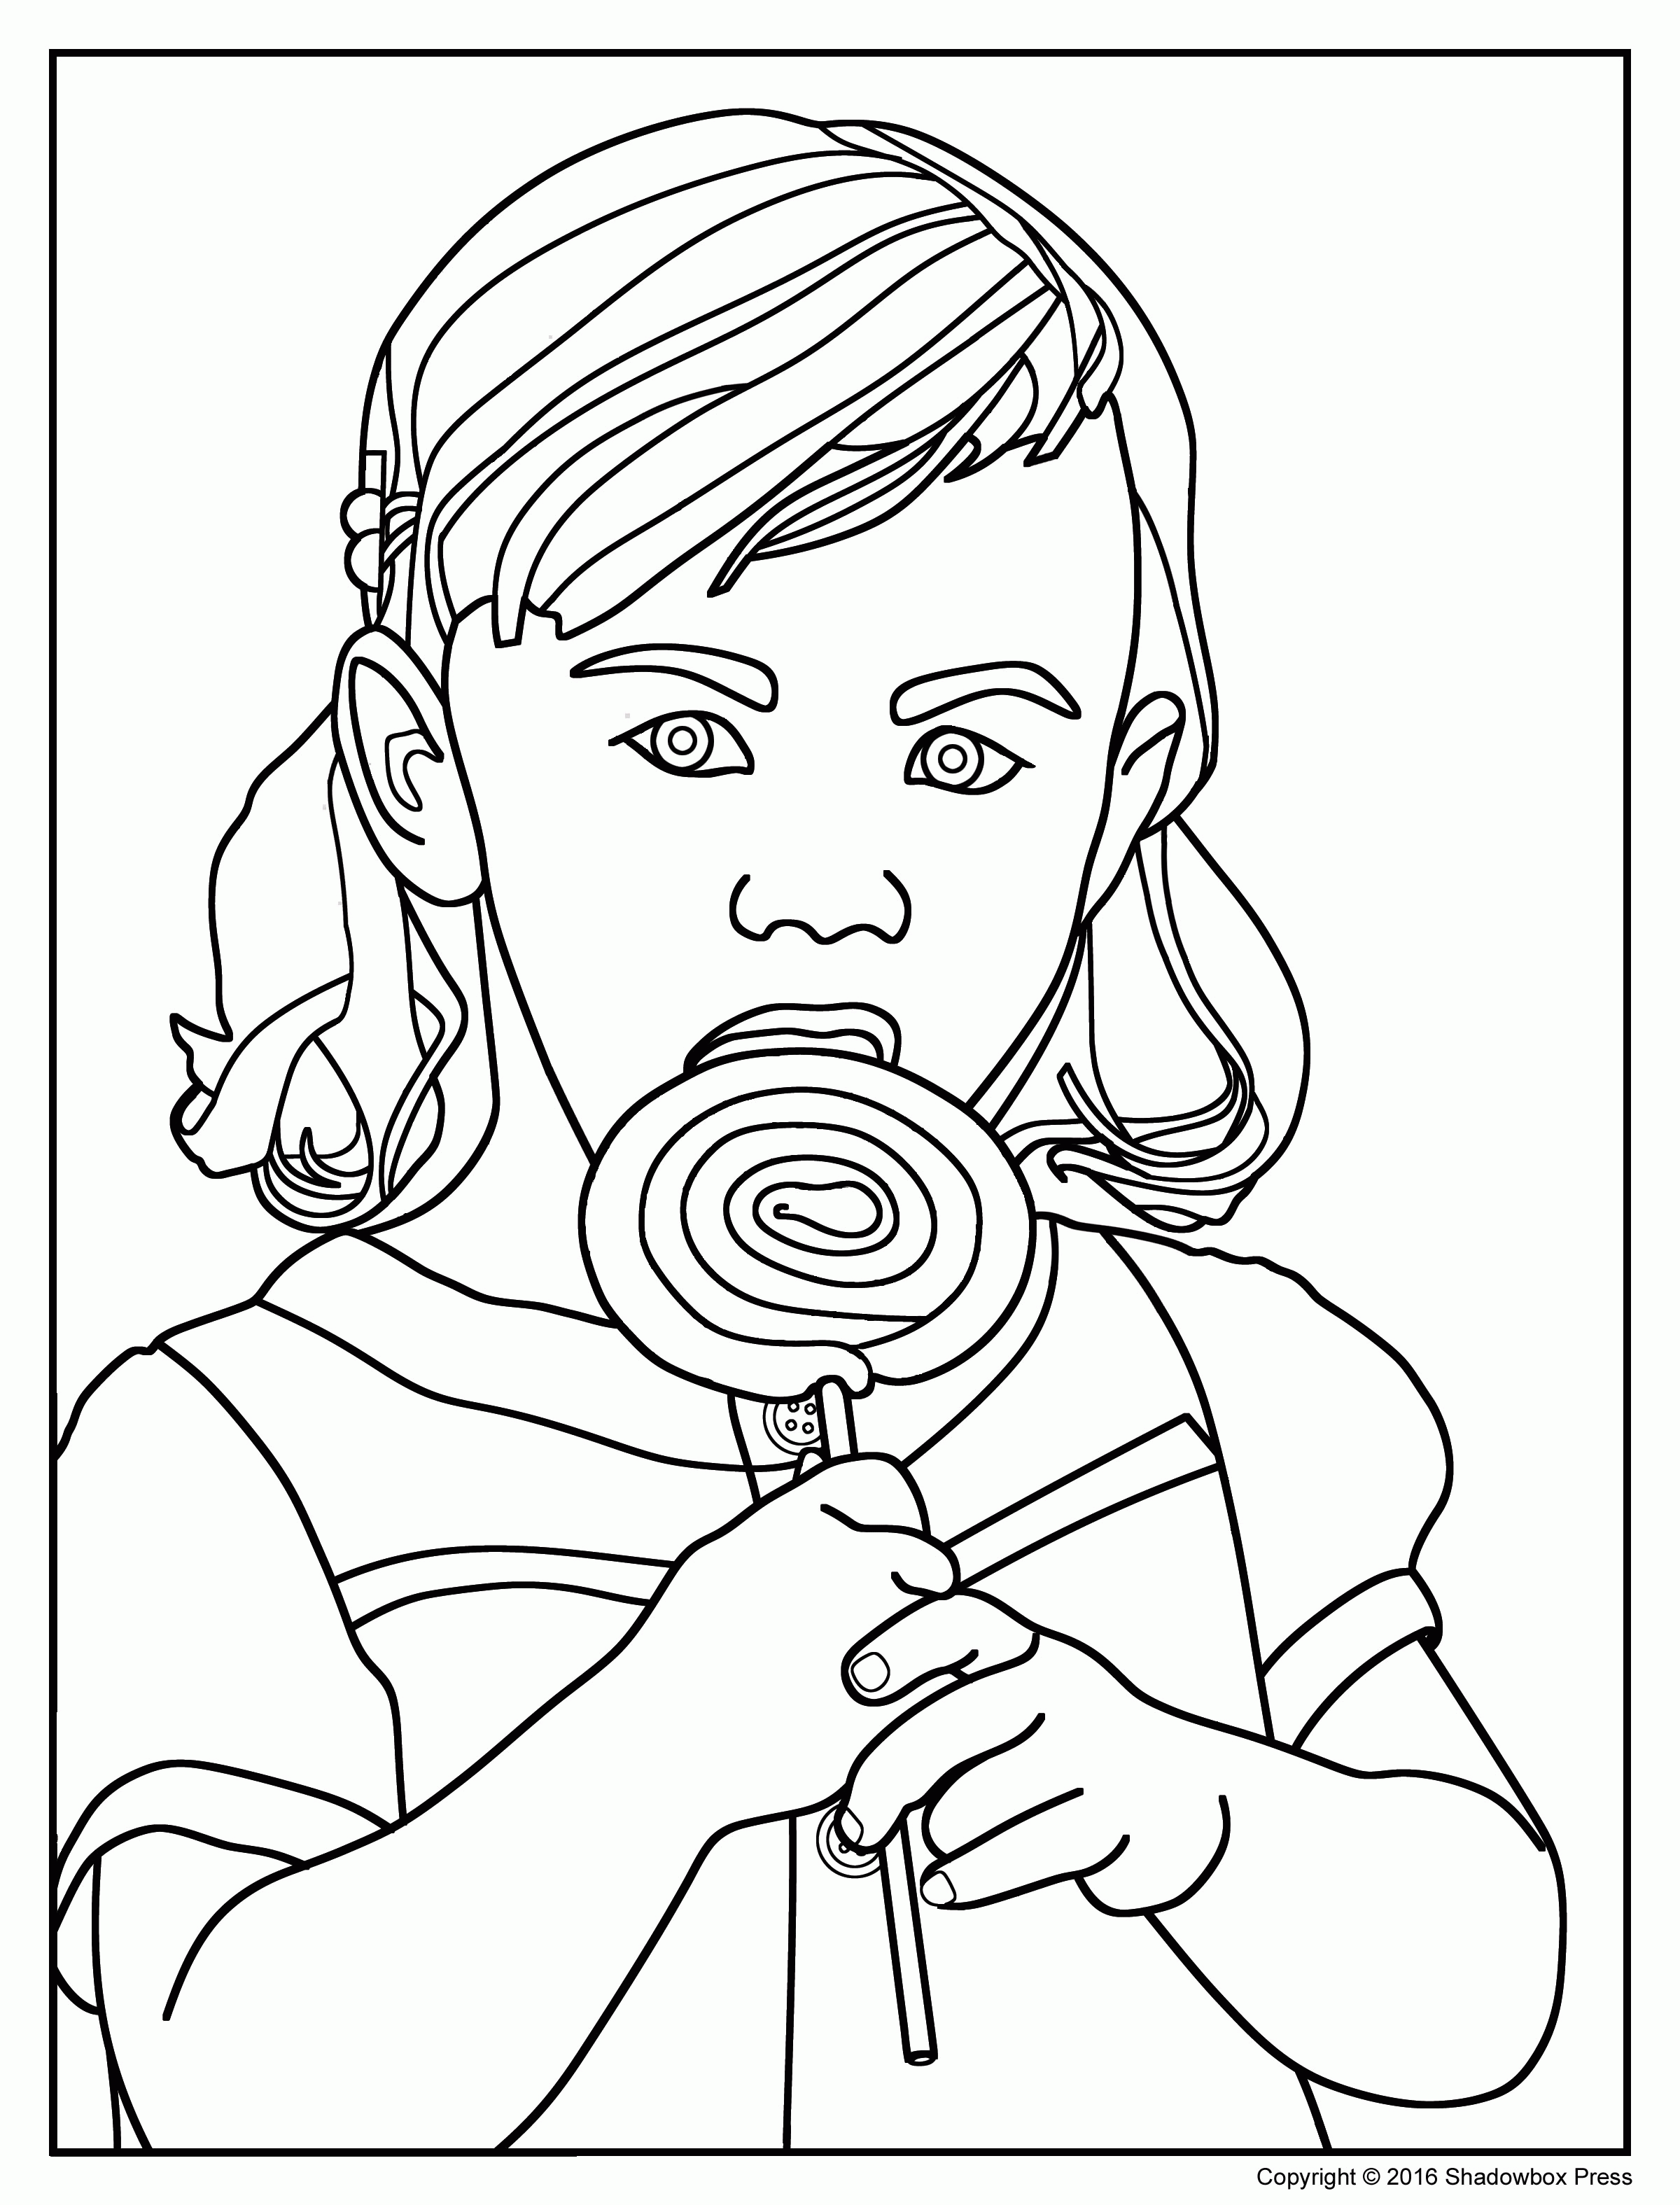 Free Downloadable Coloring Pages for Adults with Dementia – Shadowbox Press